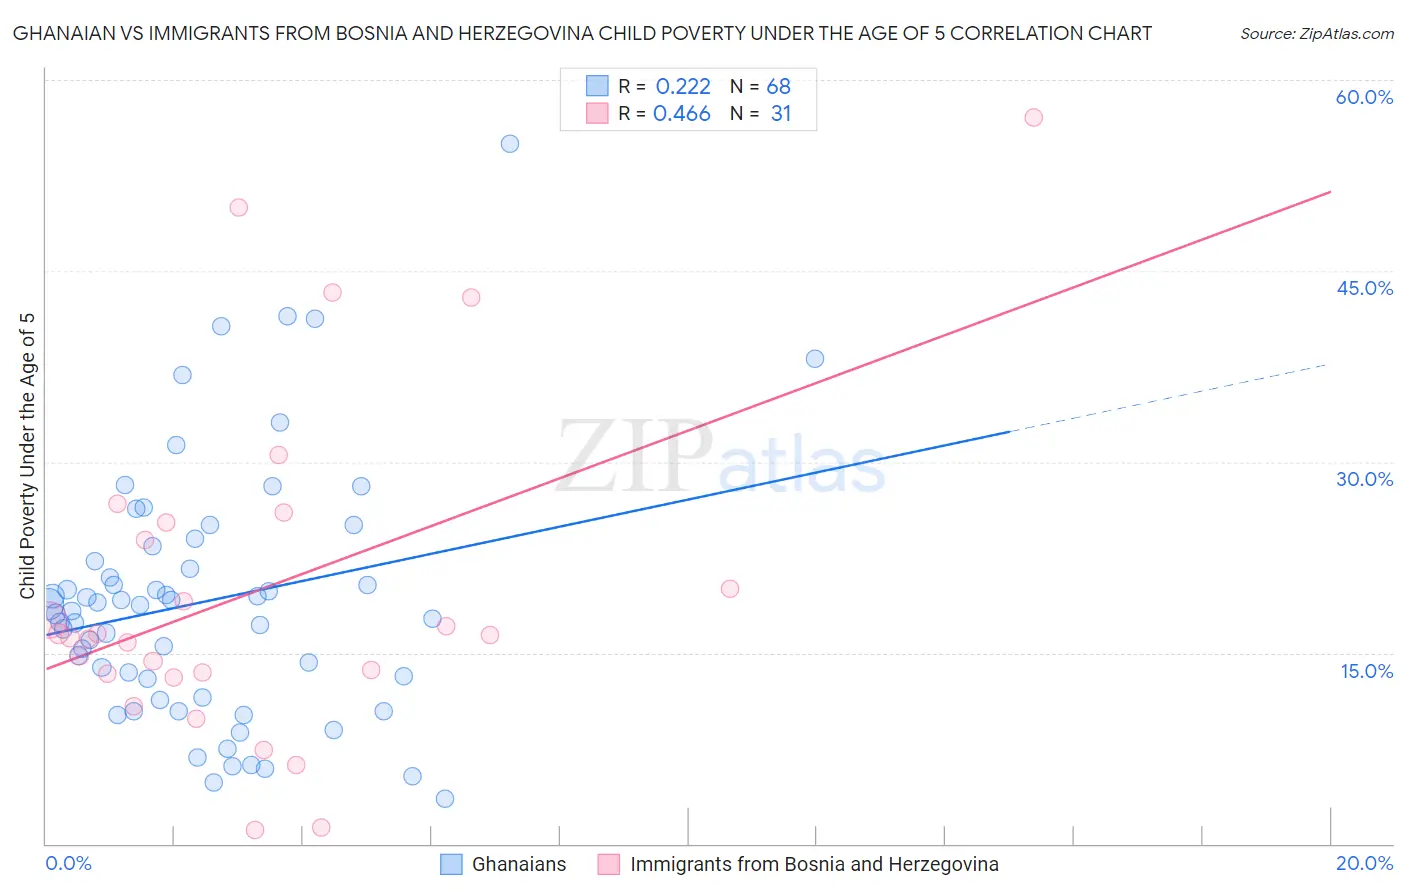 Ghanaian vs Immigrants from Bosnia and Herzegovina Child Poverty Under the Age of 5